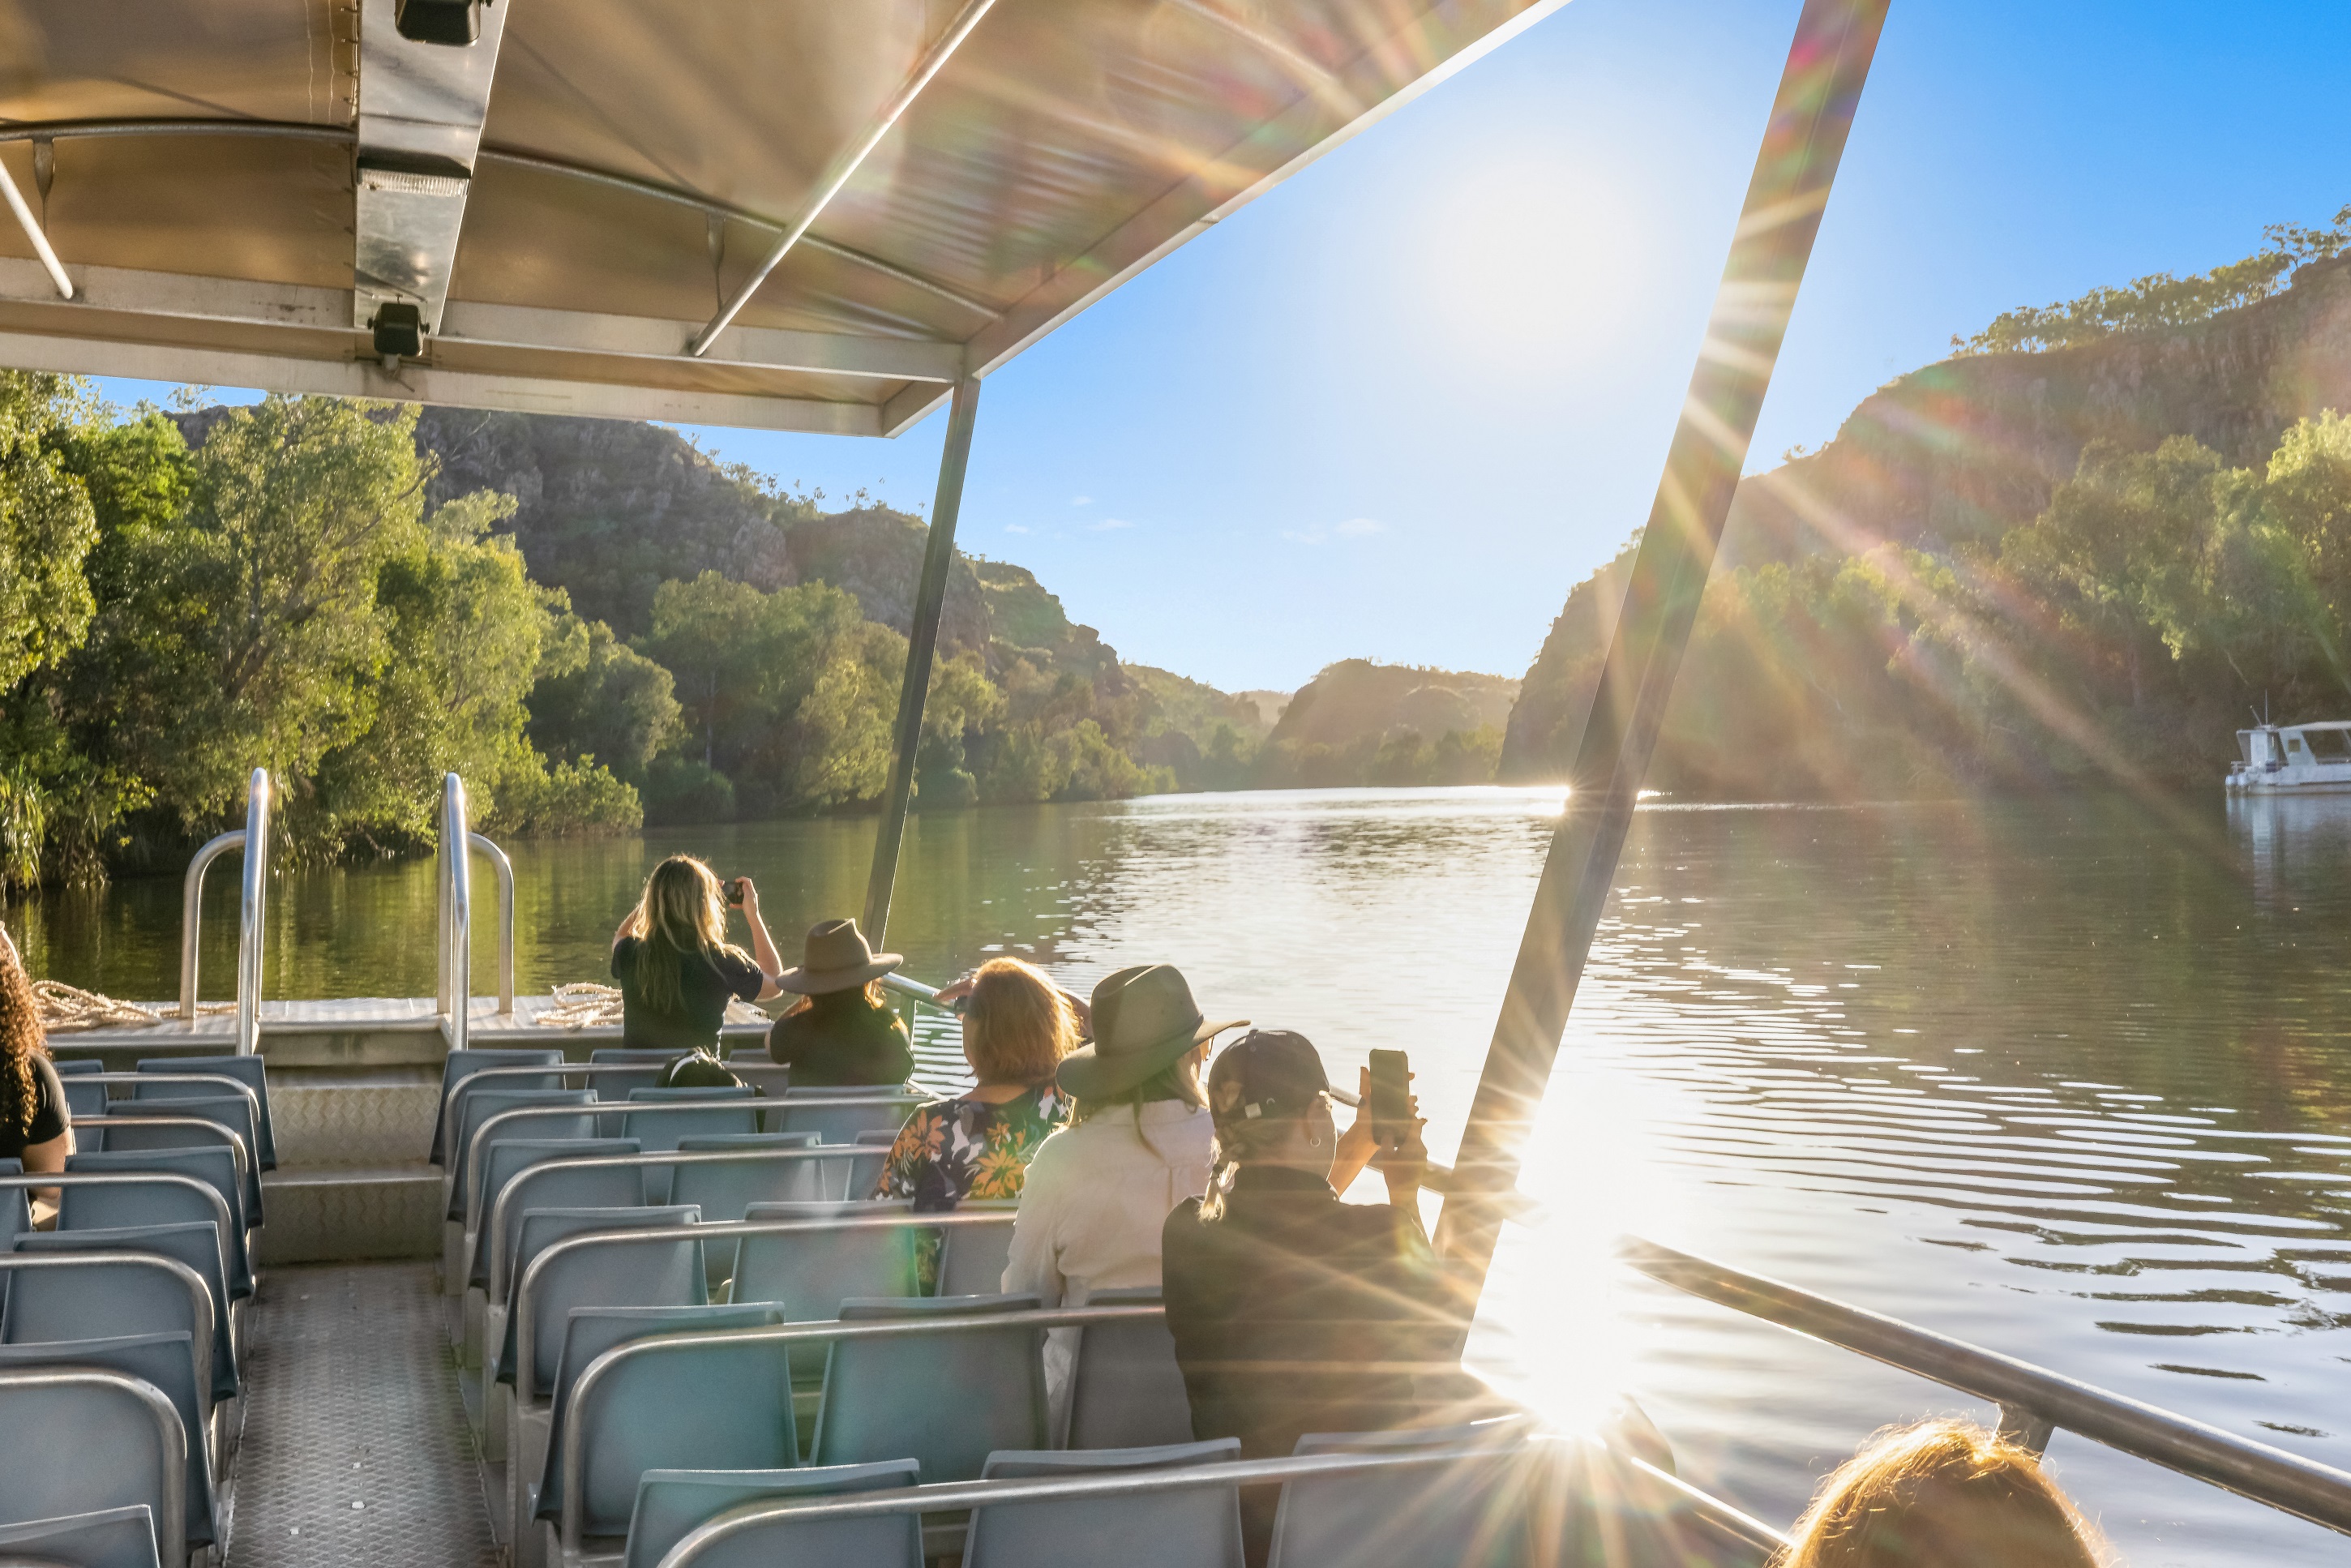 1-Day Tour to Katherine Gorge Cruise + Edith Falls from Darwin